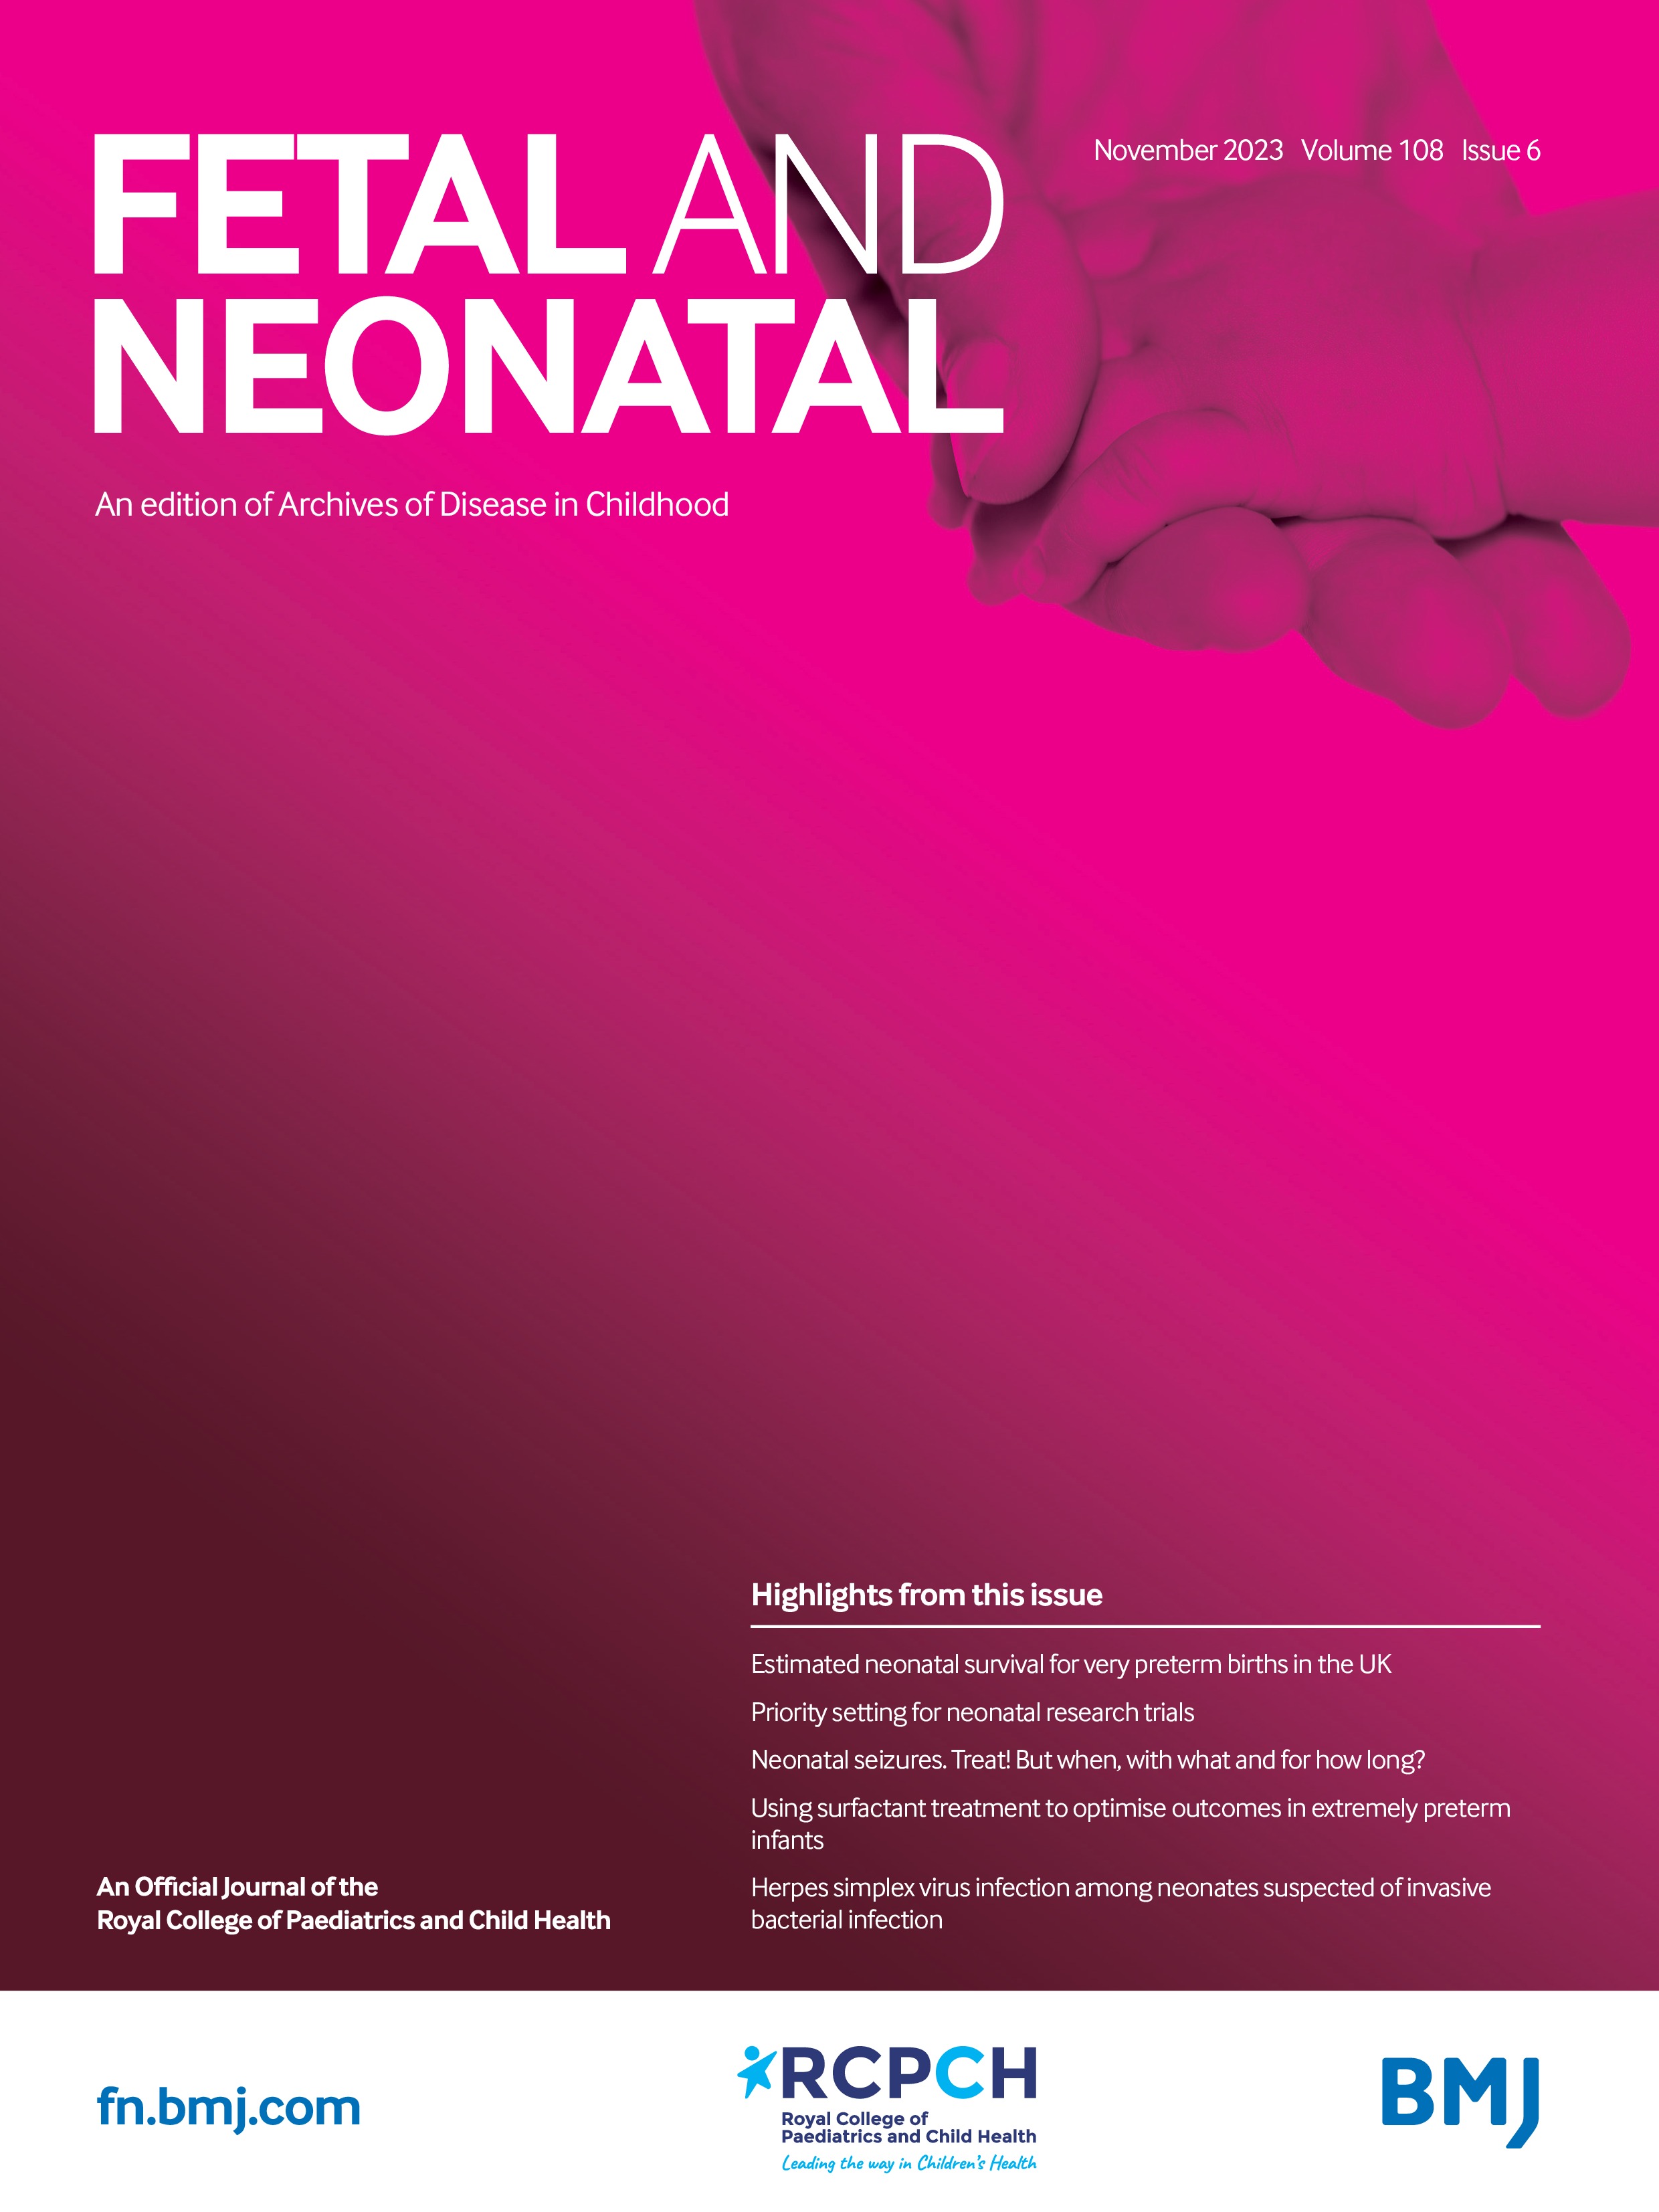 Neonatal outcomes following early fetal growth restriction: a subgroup analysis of the EVERREST study